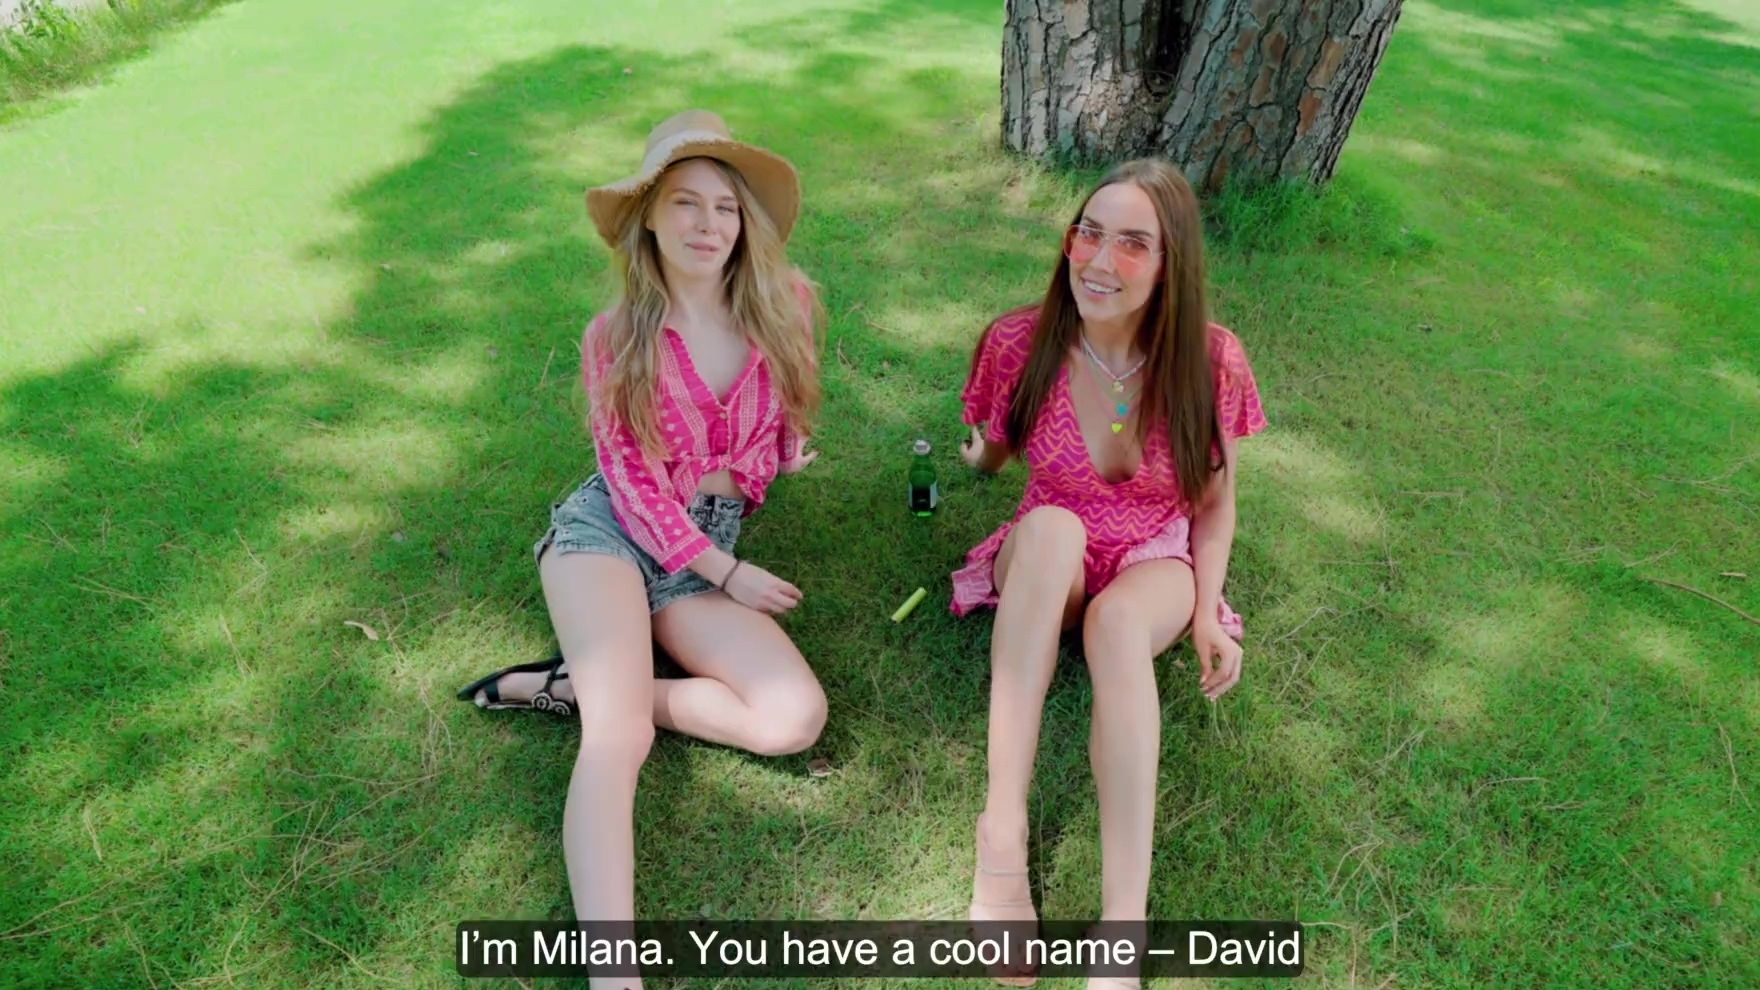 Russian girls Polina and Milana are flirting with stranger guy in the park pic